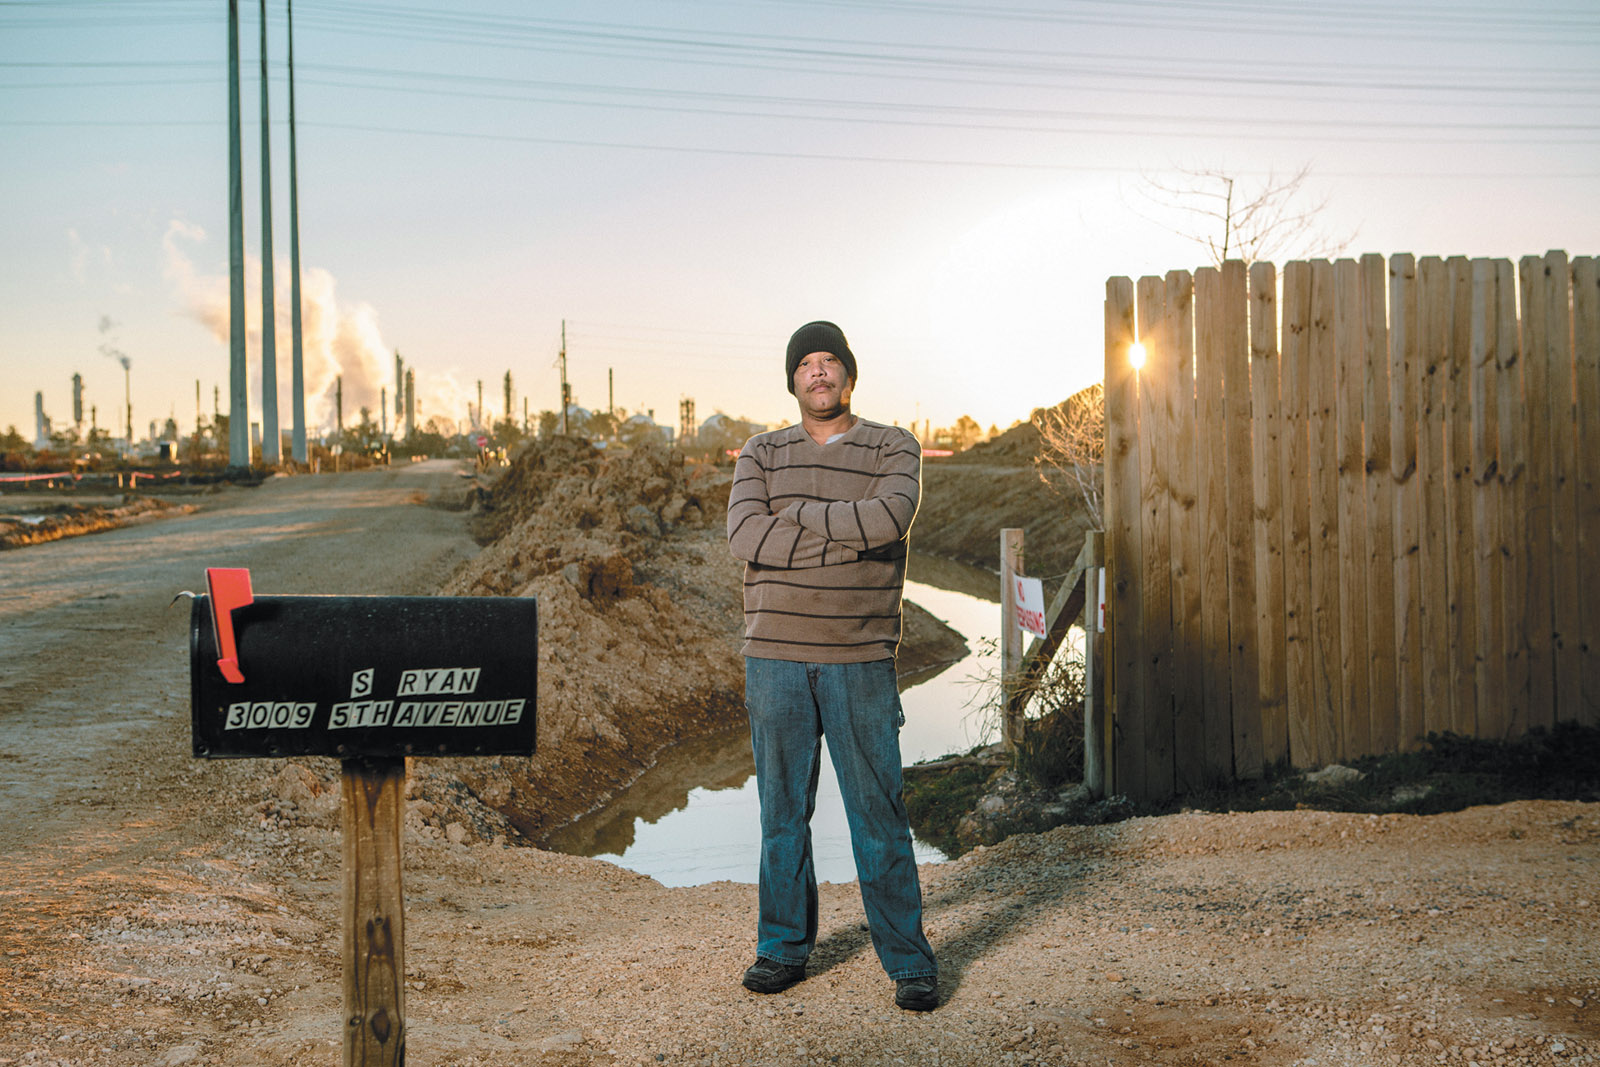 Stacey Ryan, one of the last residents of the heavily polluted town of Mossville, Louisiana, February 2016. Ryan—a descendant of Jacob Moss, the former slave who in 1790 founded one of the first settlements for free blacks in the South—did not want to move, but he was eventually forced to take a buyout from the South African petrochemical company Sasol, which had made his land unlivable as it expanded its facilities into the town.